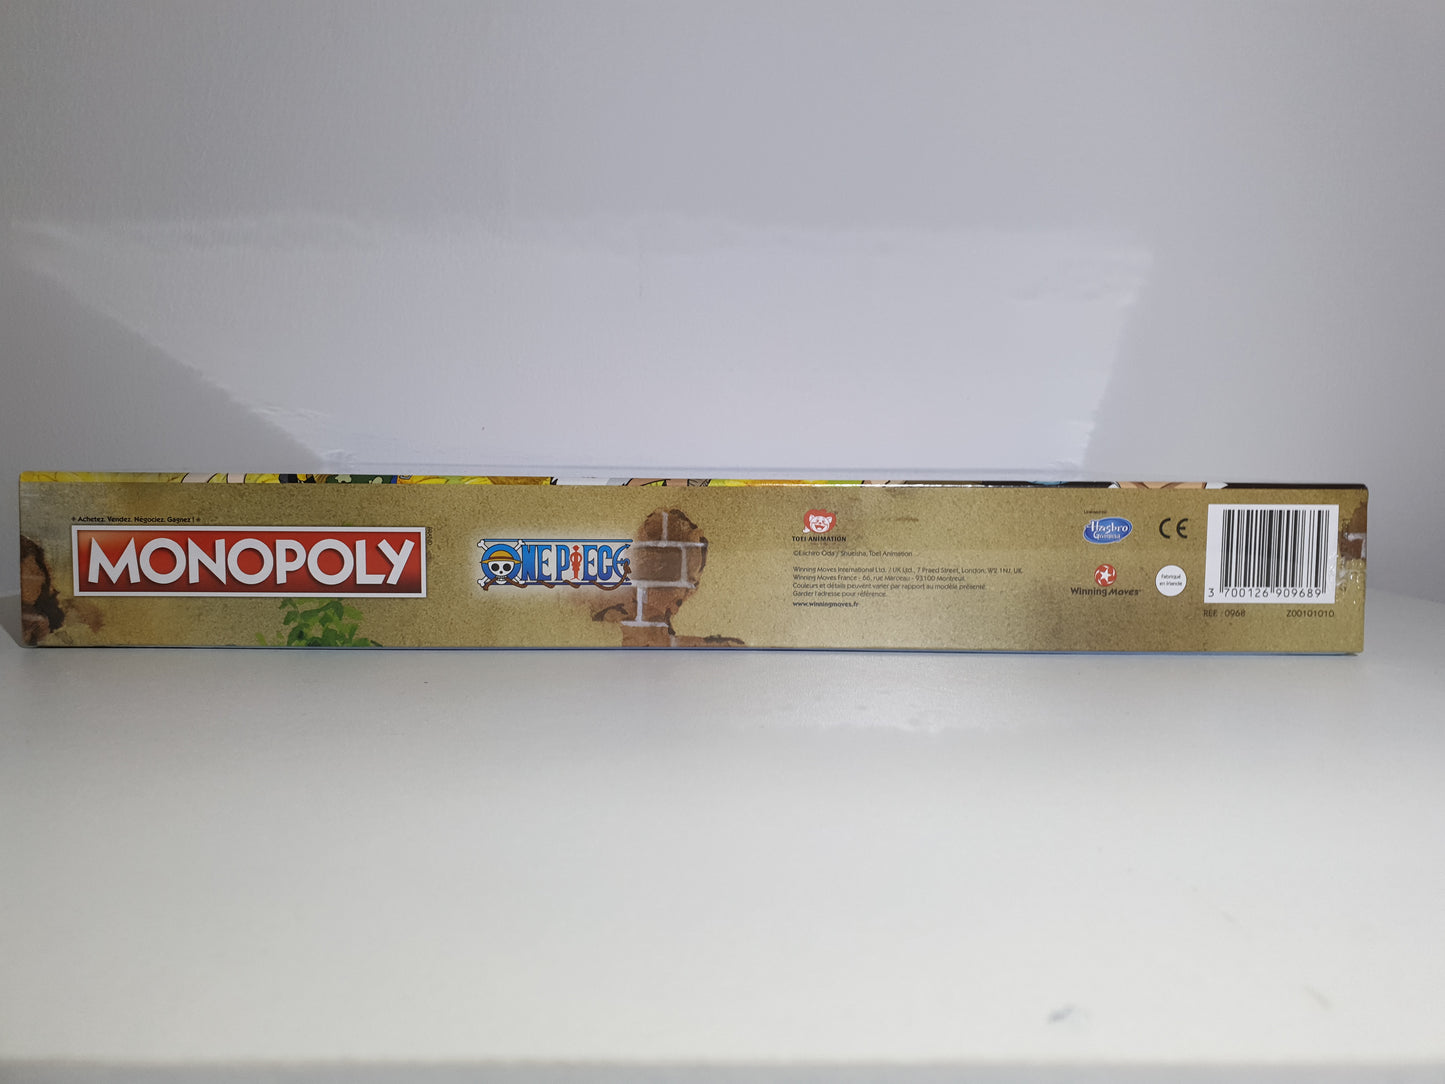 MONOPOLY ONE PIECE - NEUF SOUS BLISTER